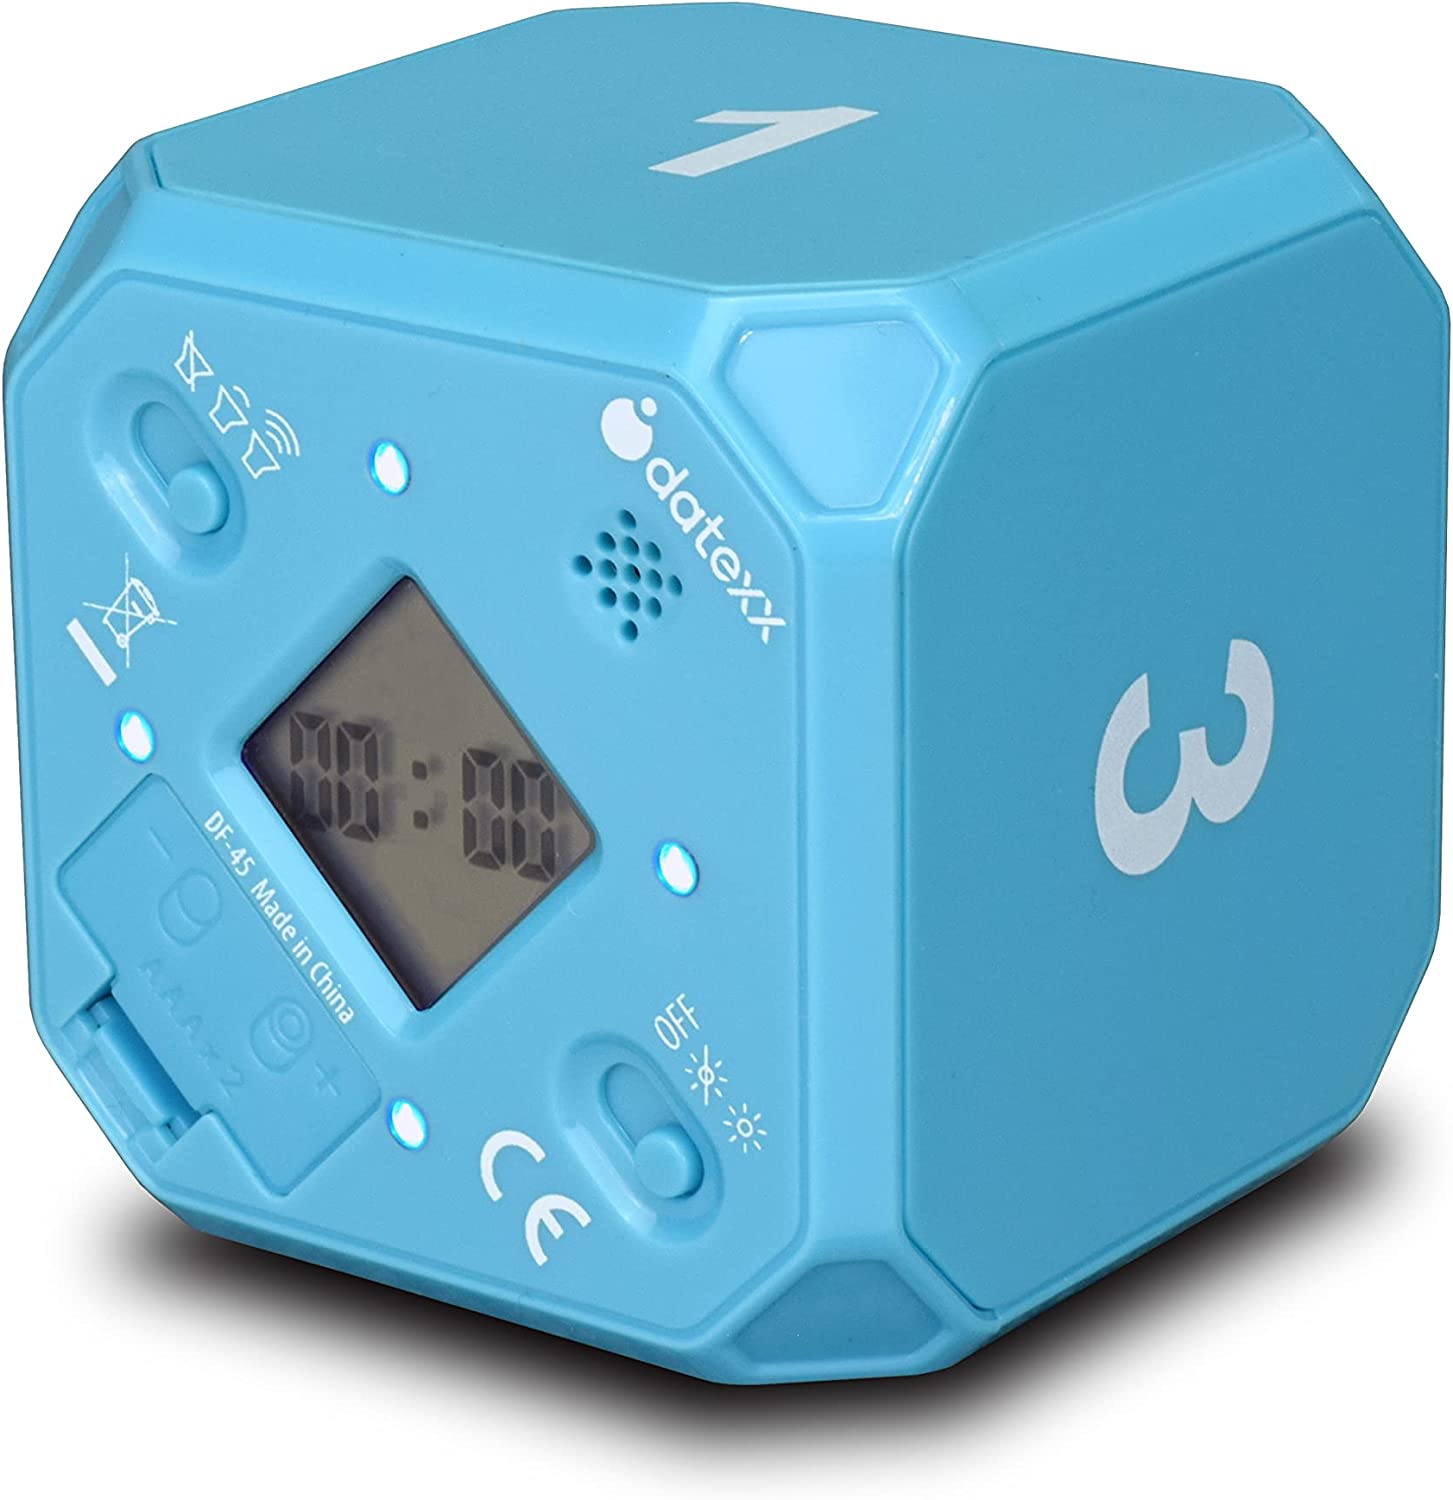 TimeCube Plus Preset Timer with 4 LED Light Alarm for Time Management, and Countdown Settings (Green - 1,5,10,15 min)